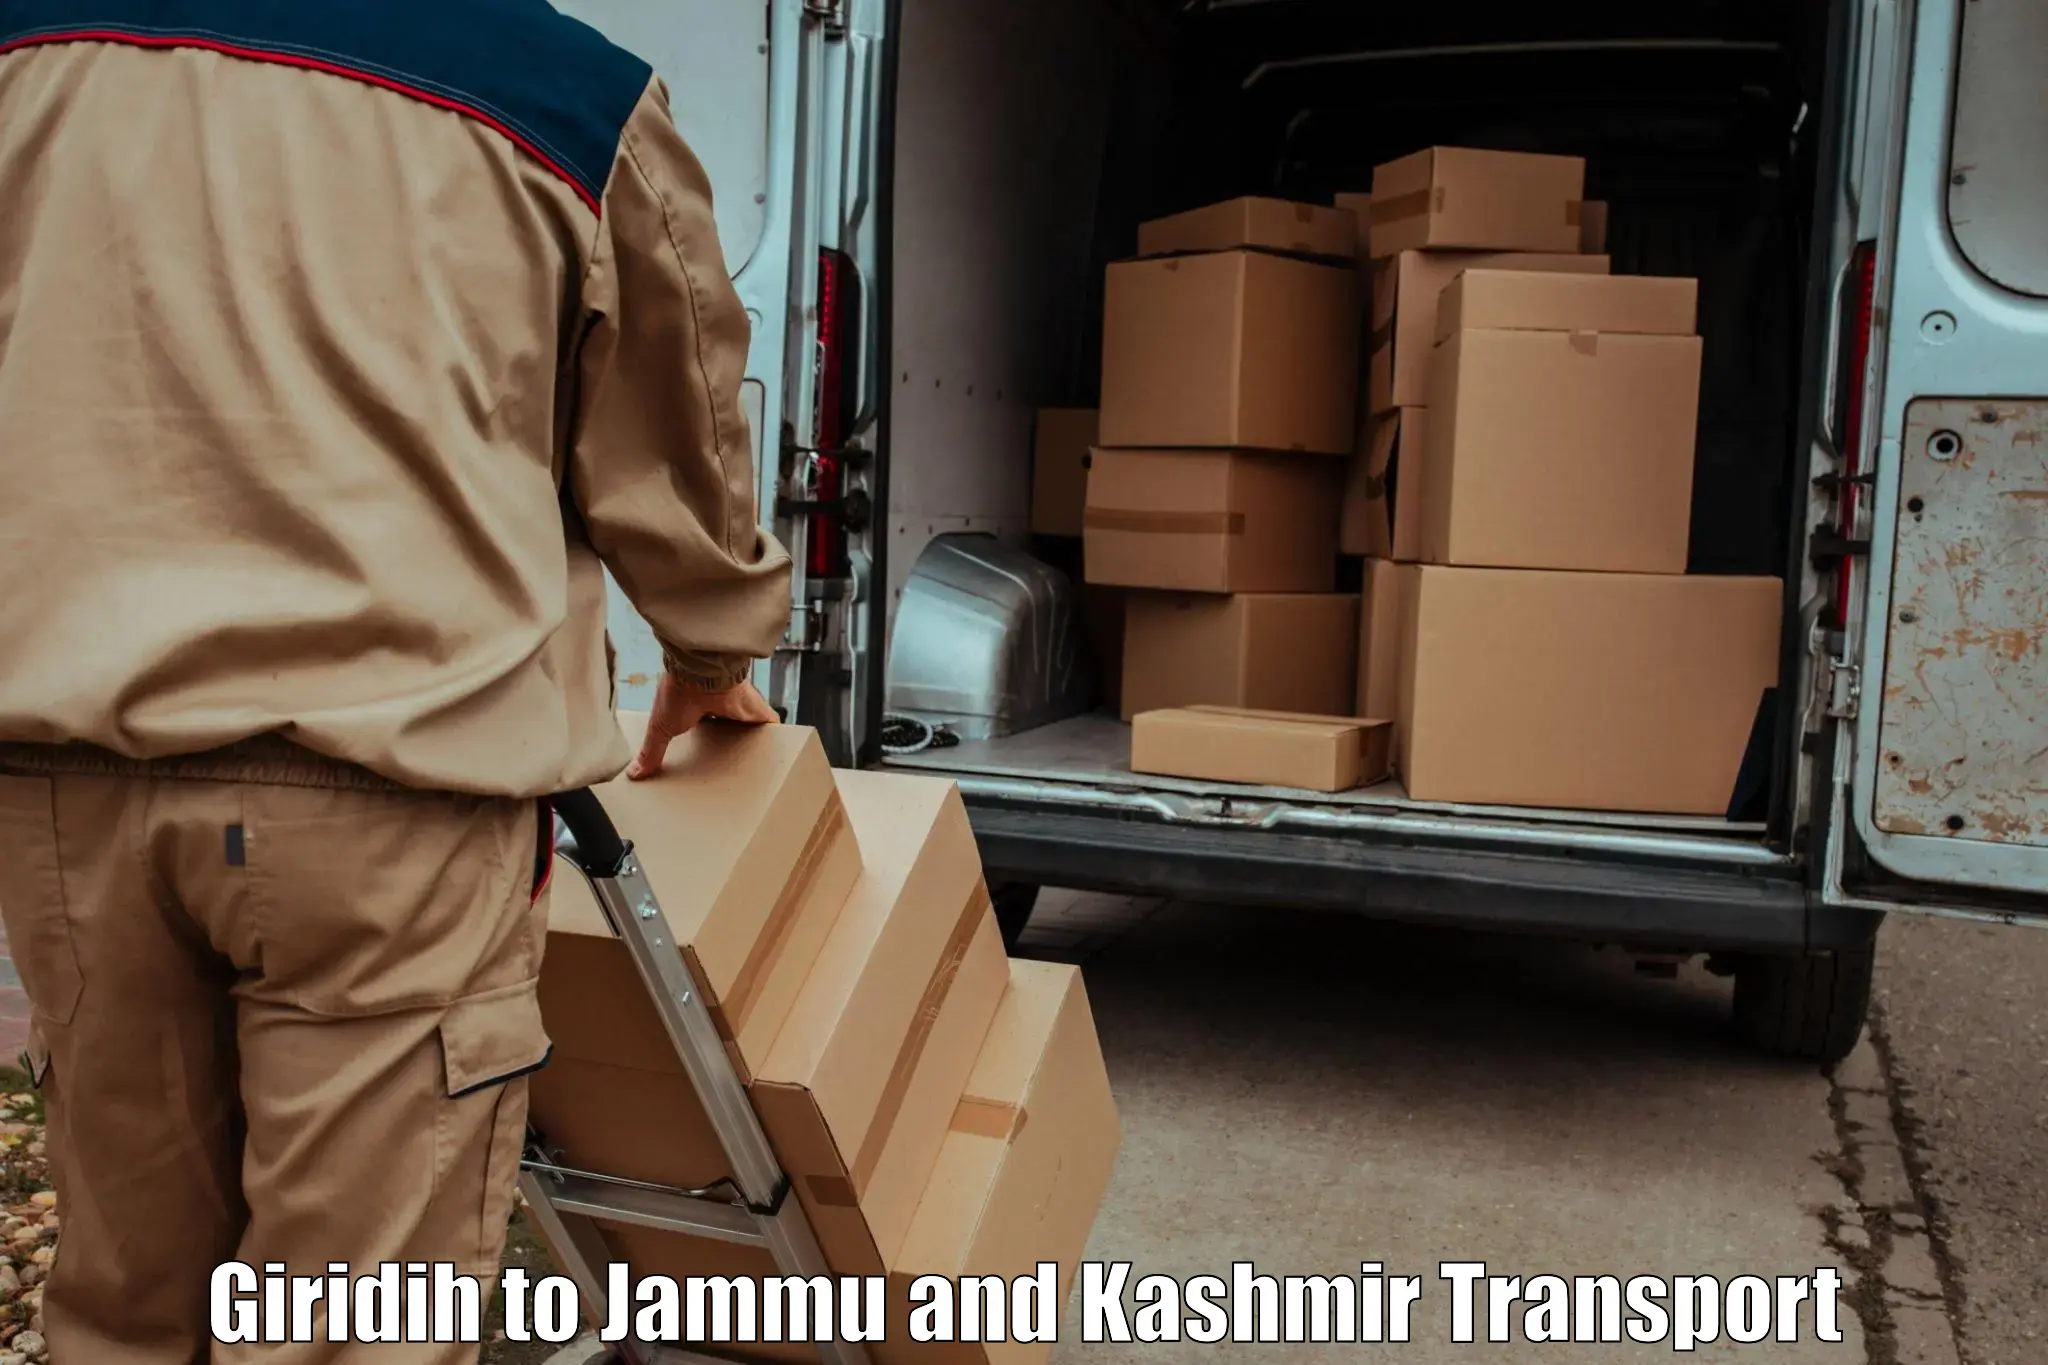 Package delivery services Giridih to Srinagar Kashmir